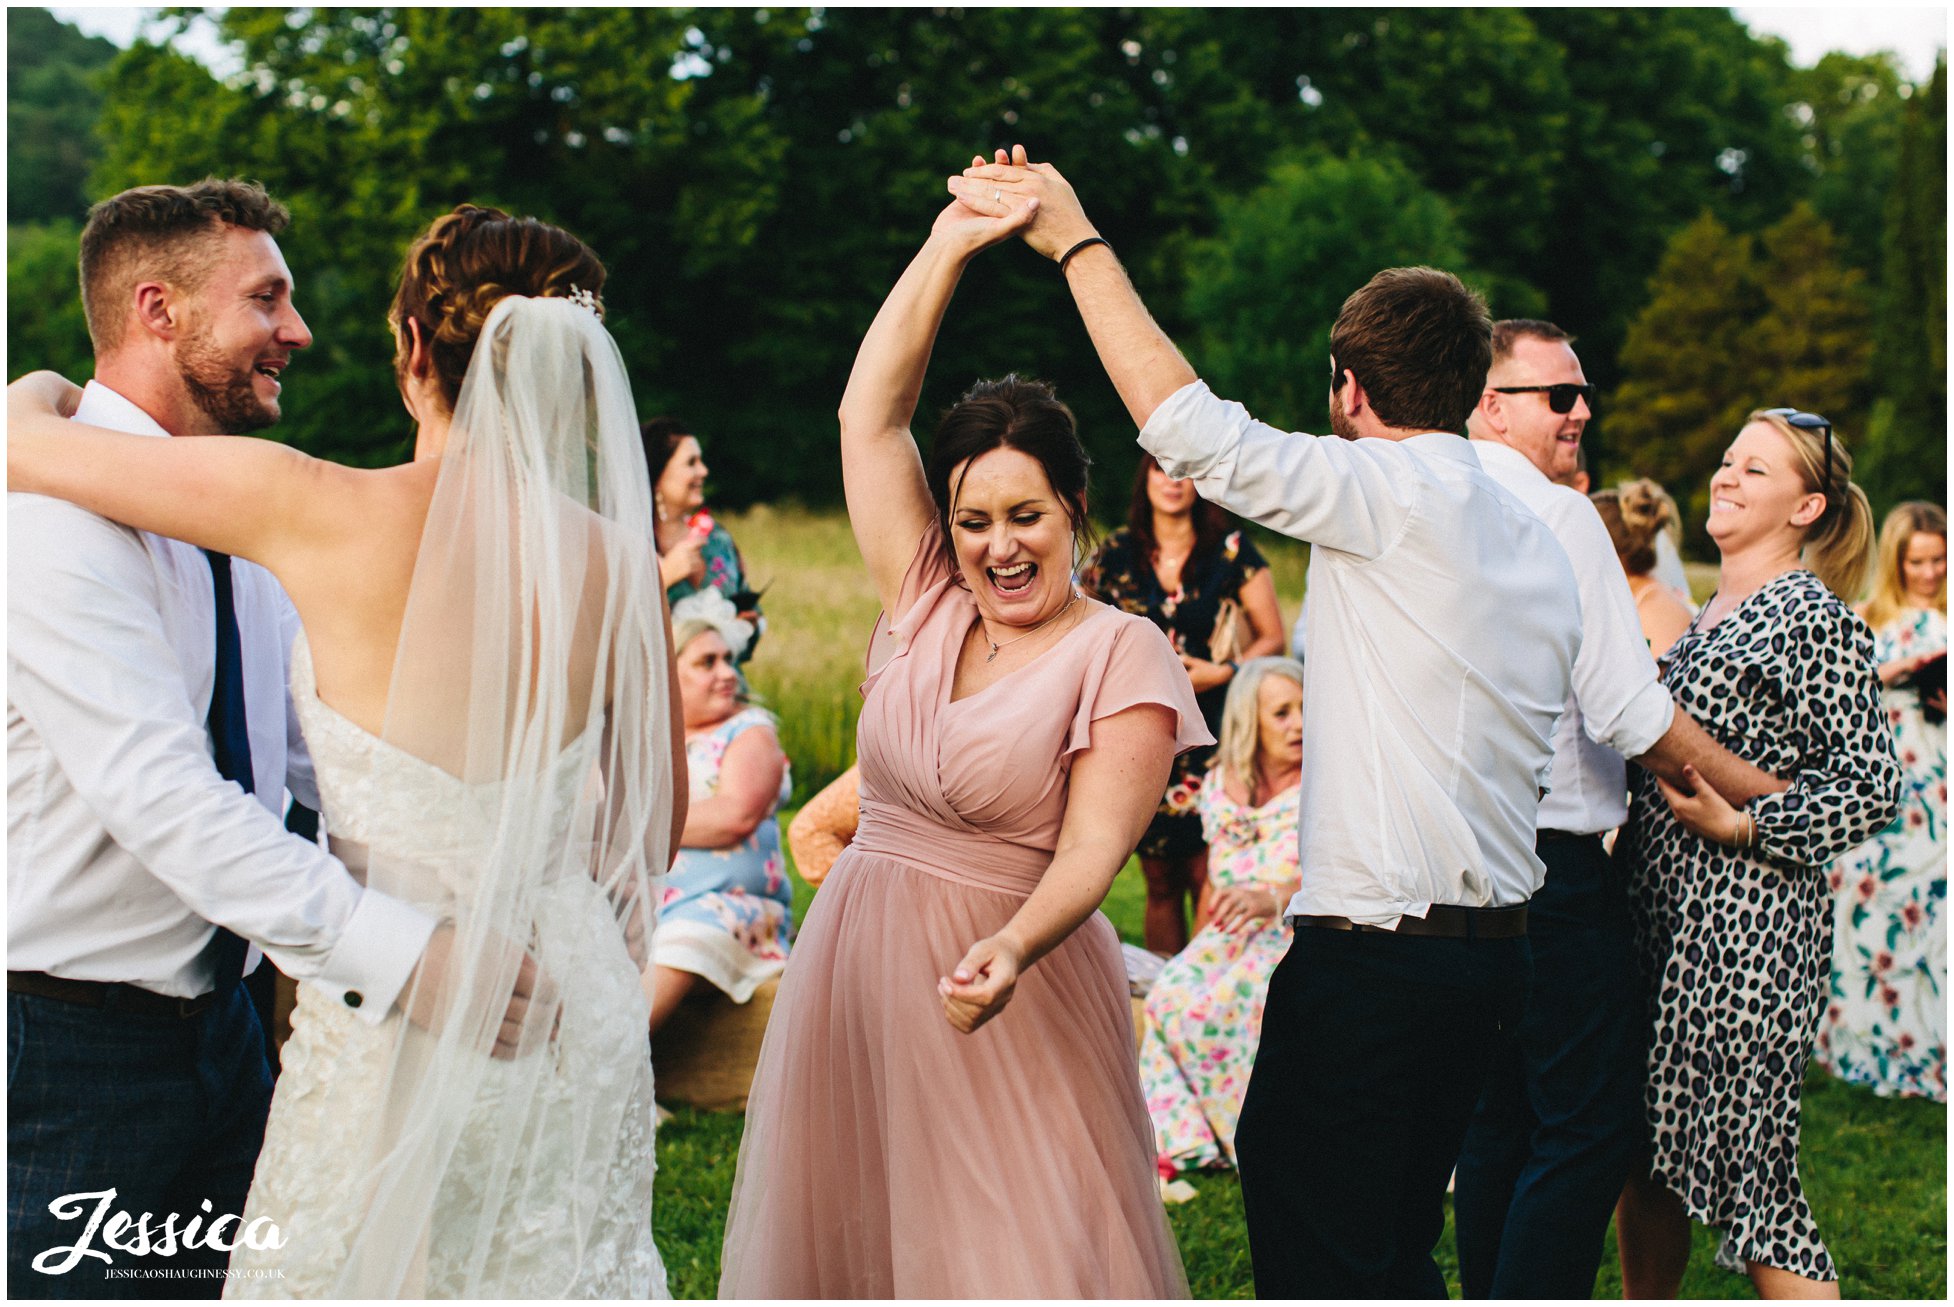 guests join the couple and dance outside on the lawn